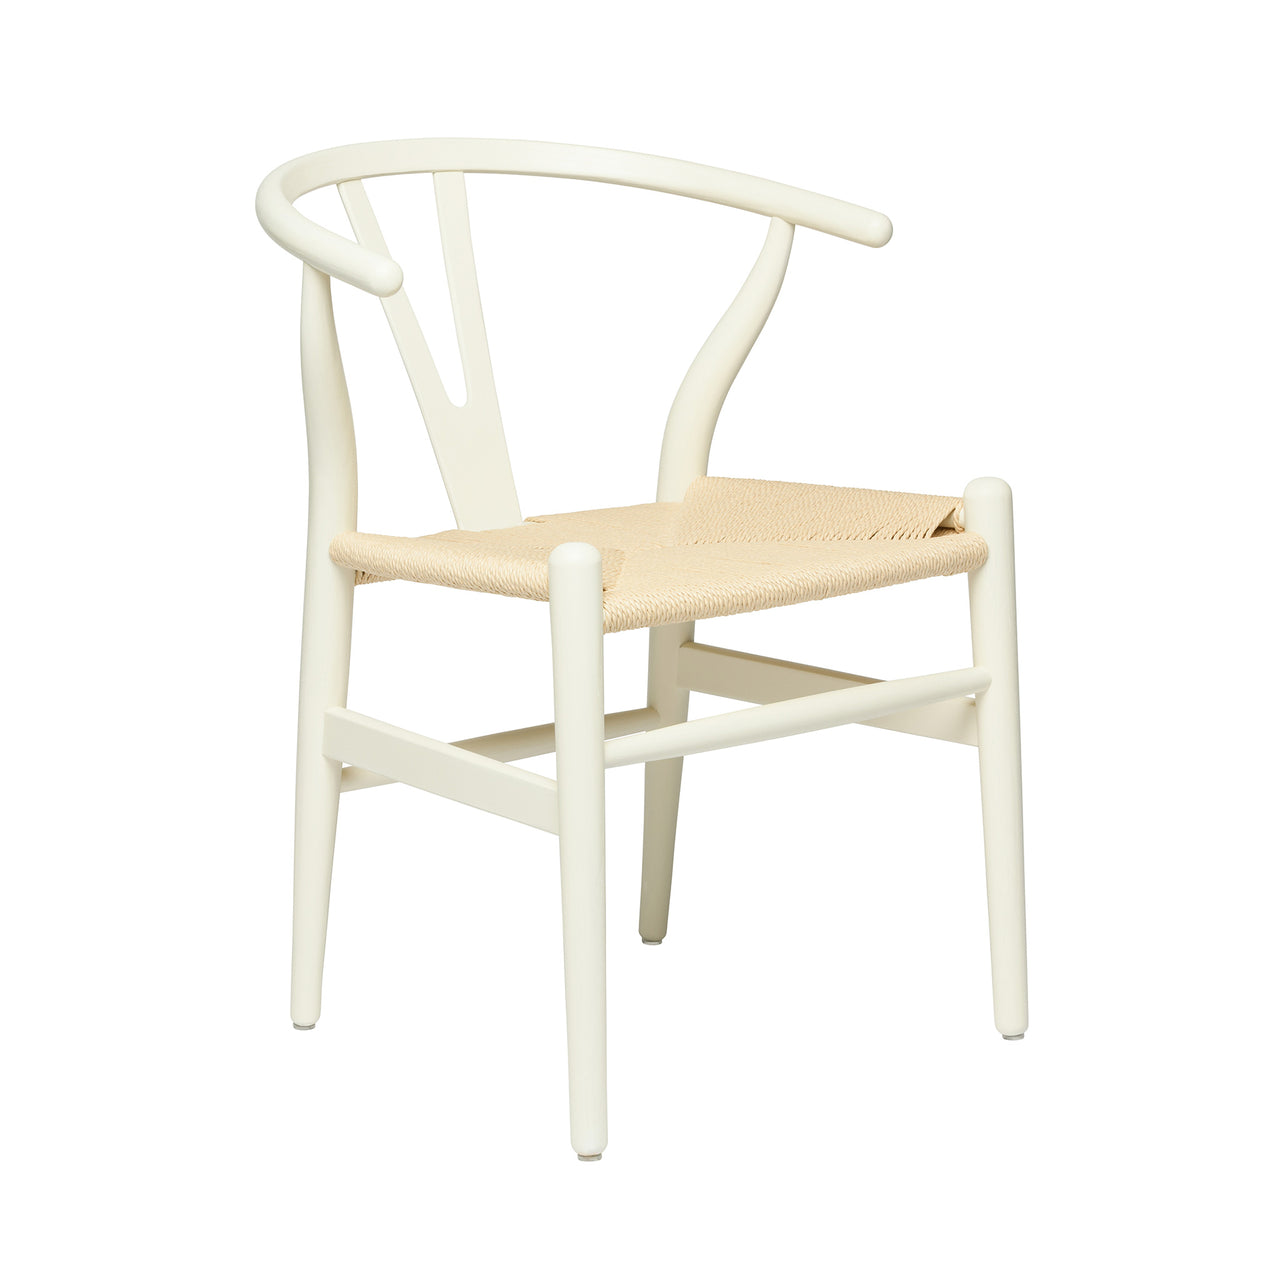 Wishbone Chair (Rustic White/Natural Woven Cord)